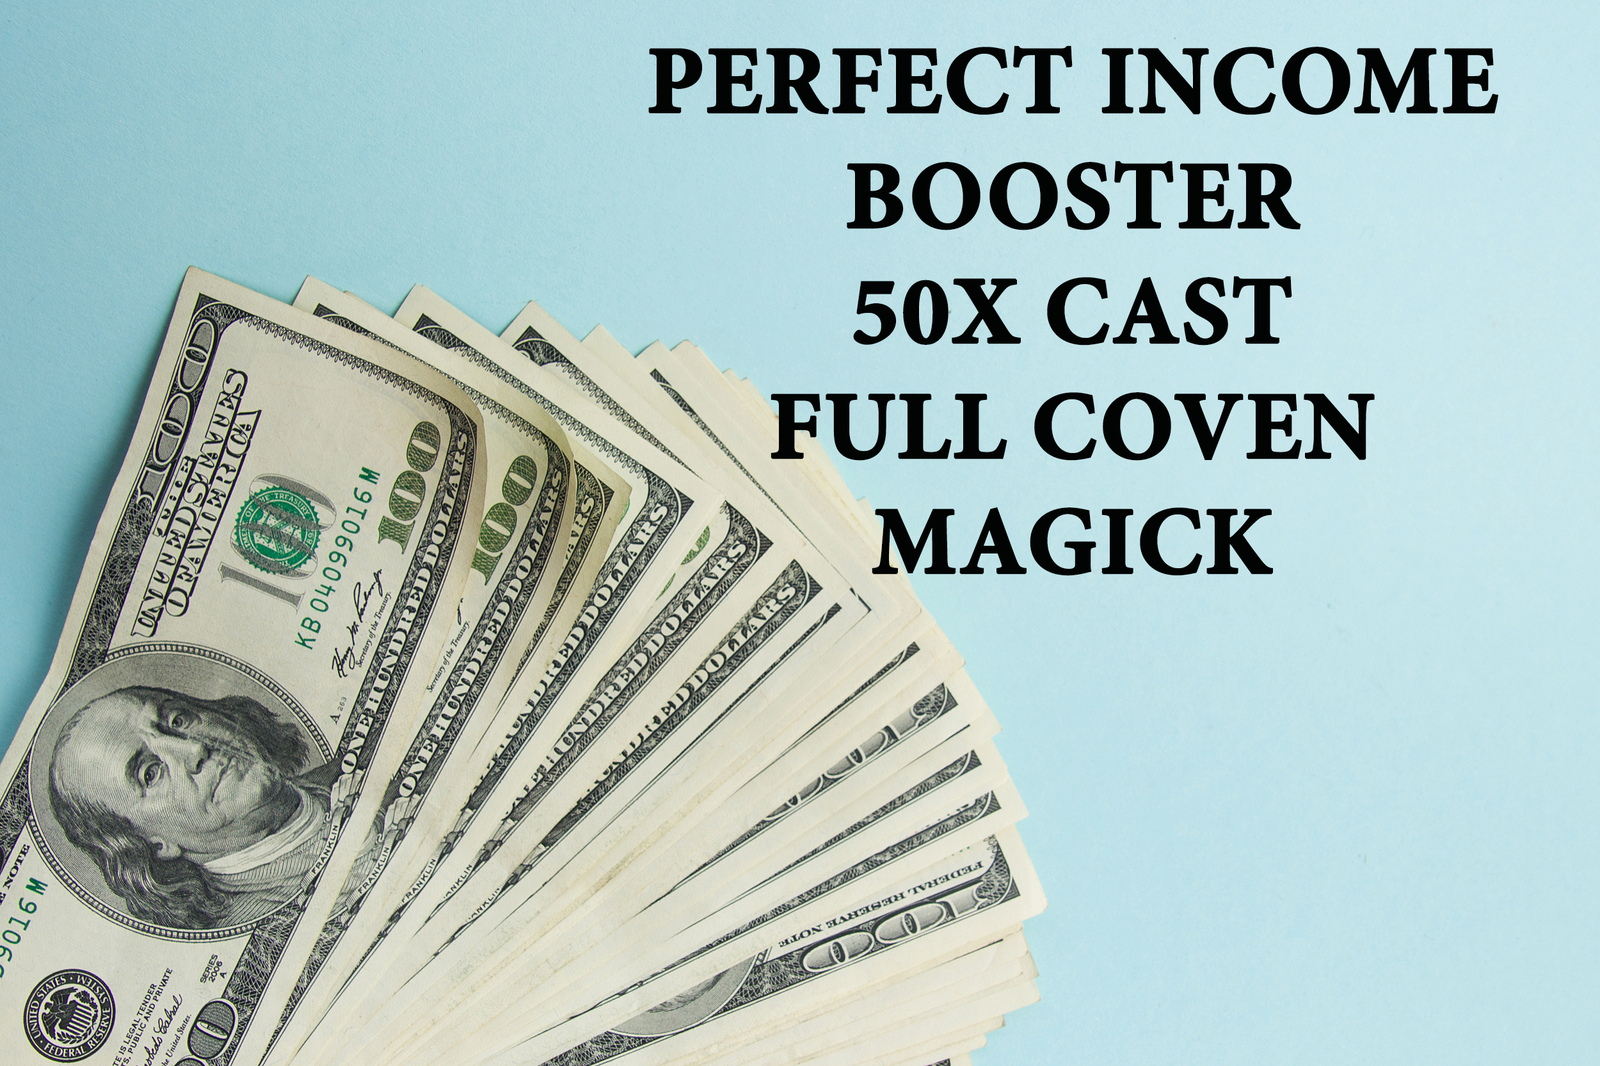 50X FULL COVEN PERFECT INCOME BOOSTER ENHANCE MONEY FLOW MAGICK RING PENDANT